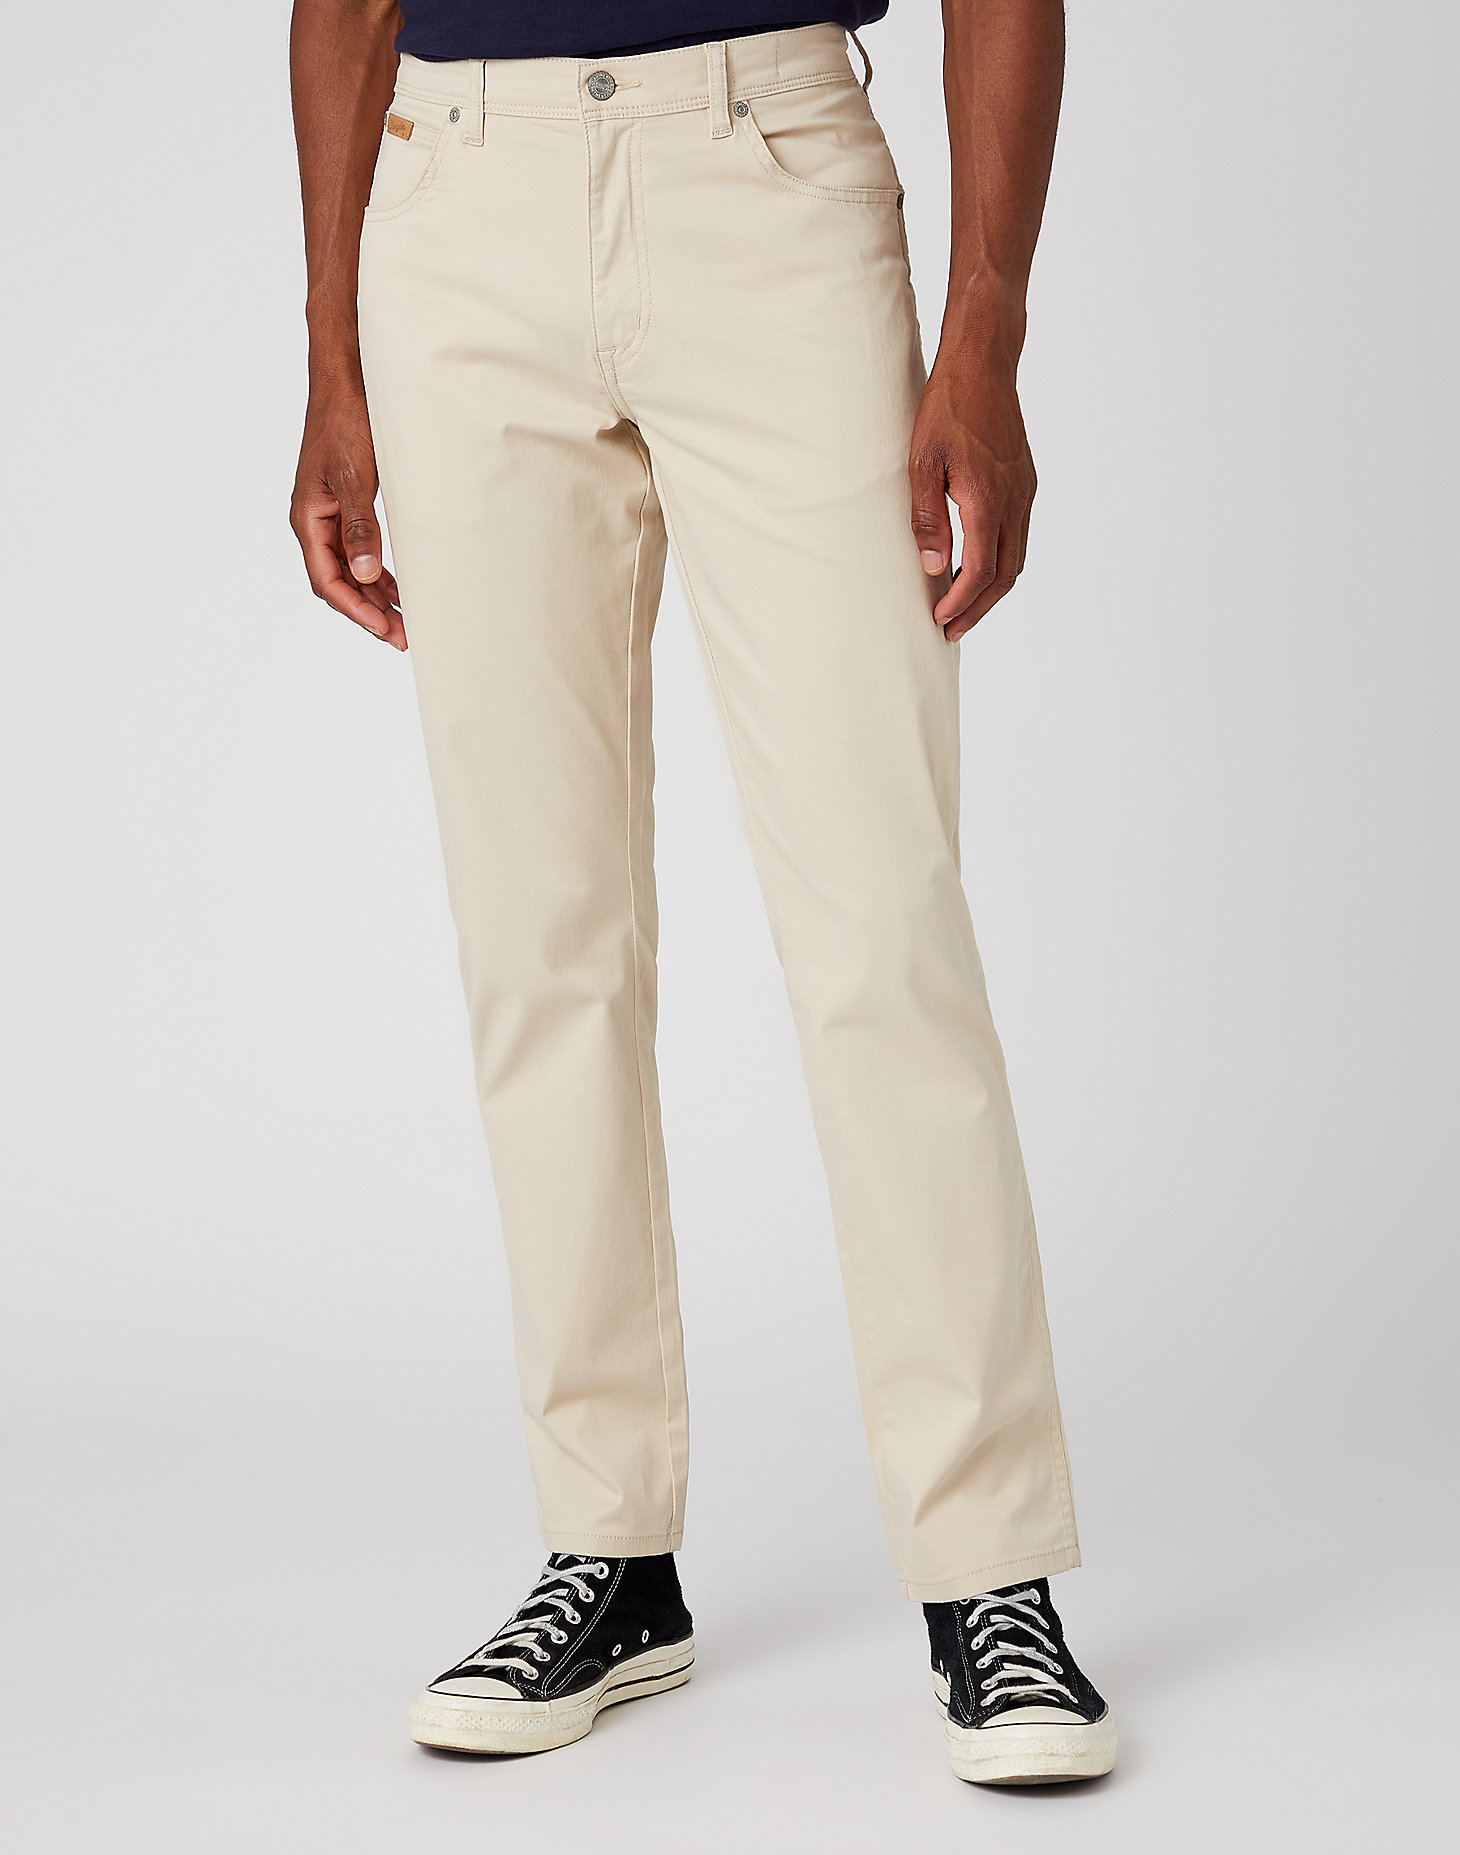 Texas Slim Trousers in Pumice Stone main view